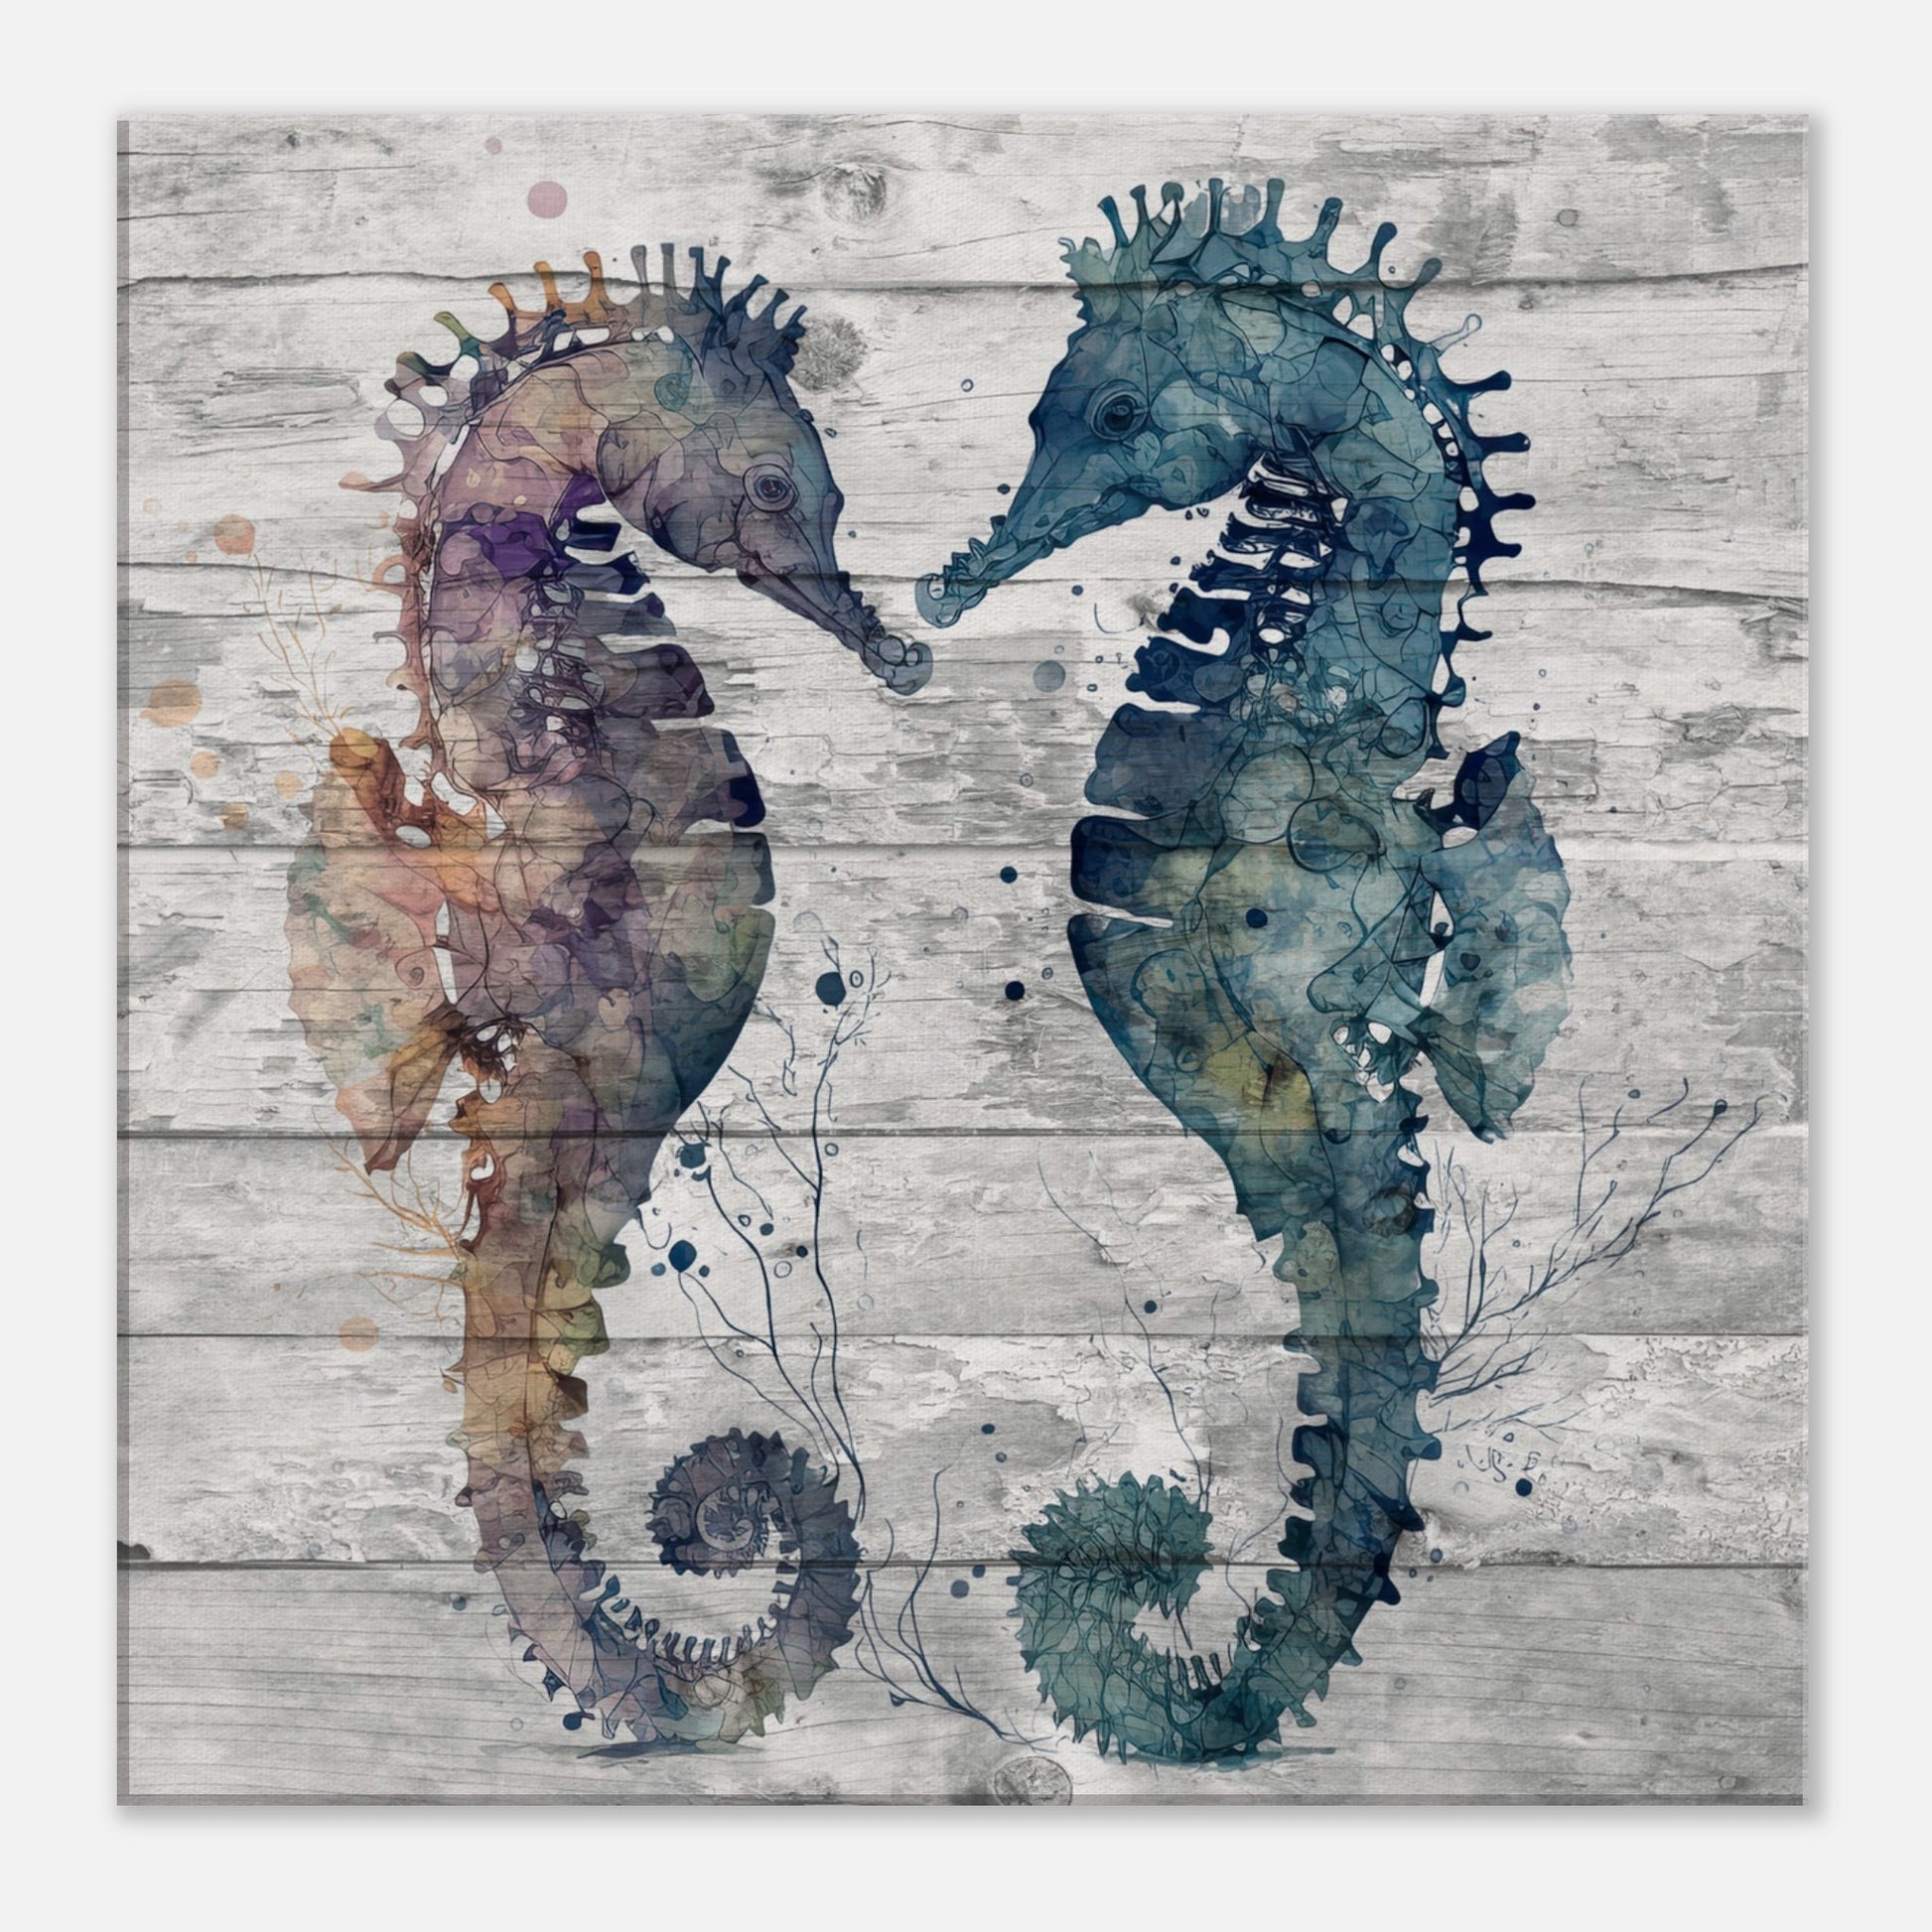 Two Tone  Duo Seahorses Canvas Wall Print by Caribbean Rays